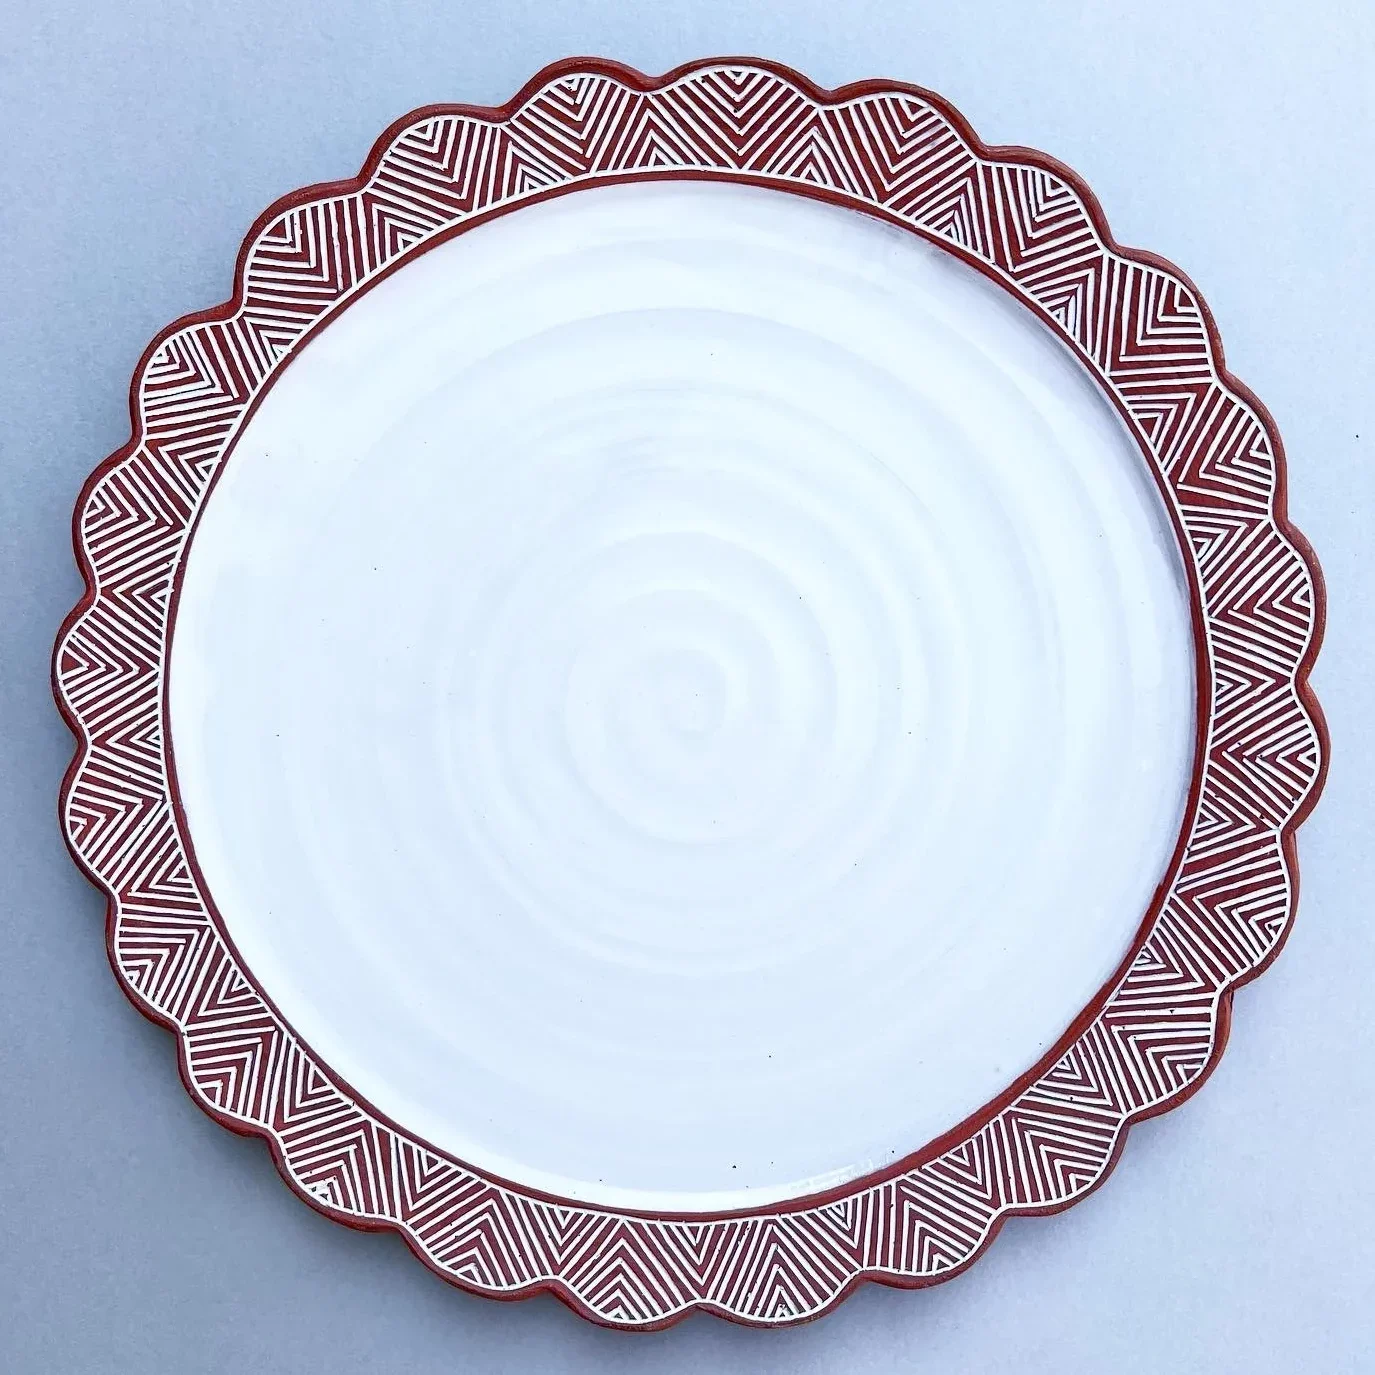 Serving platter with red patterned rim